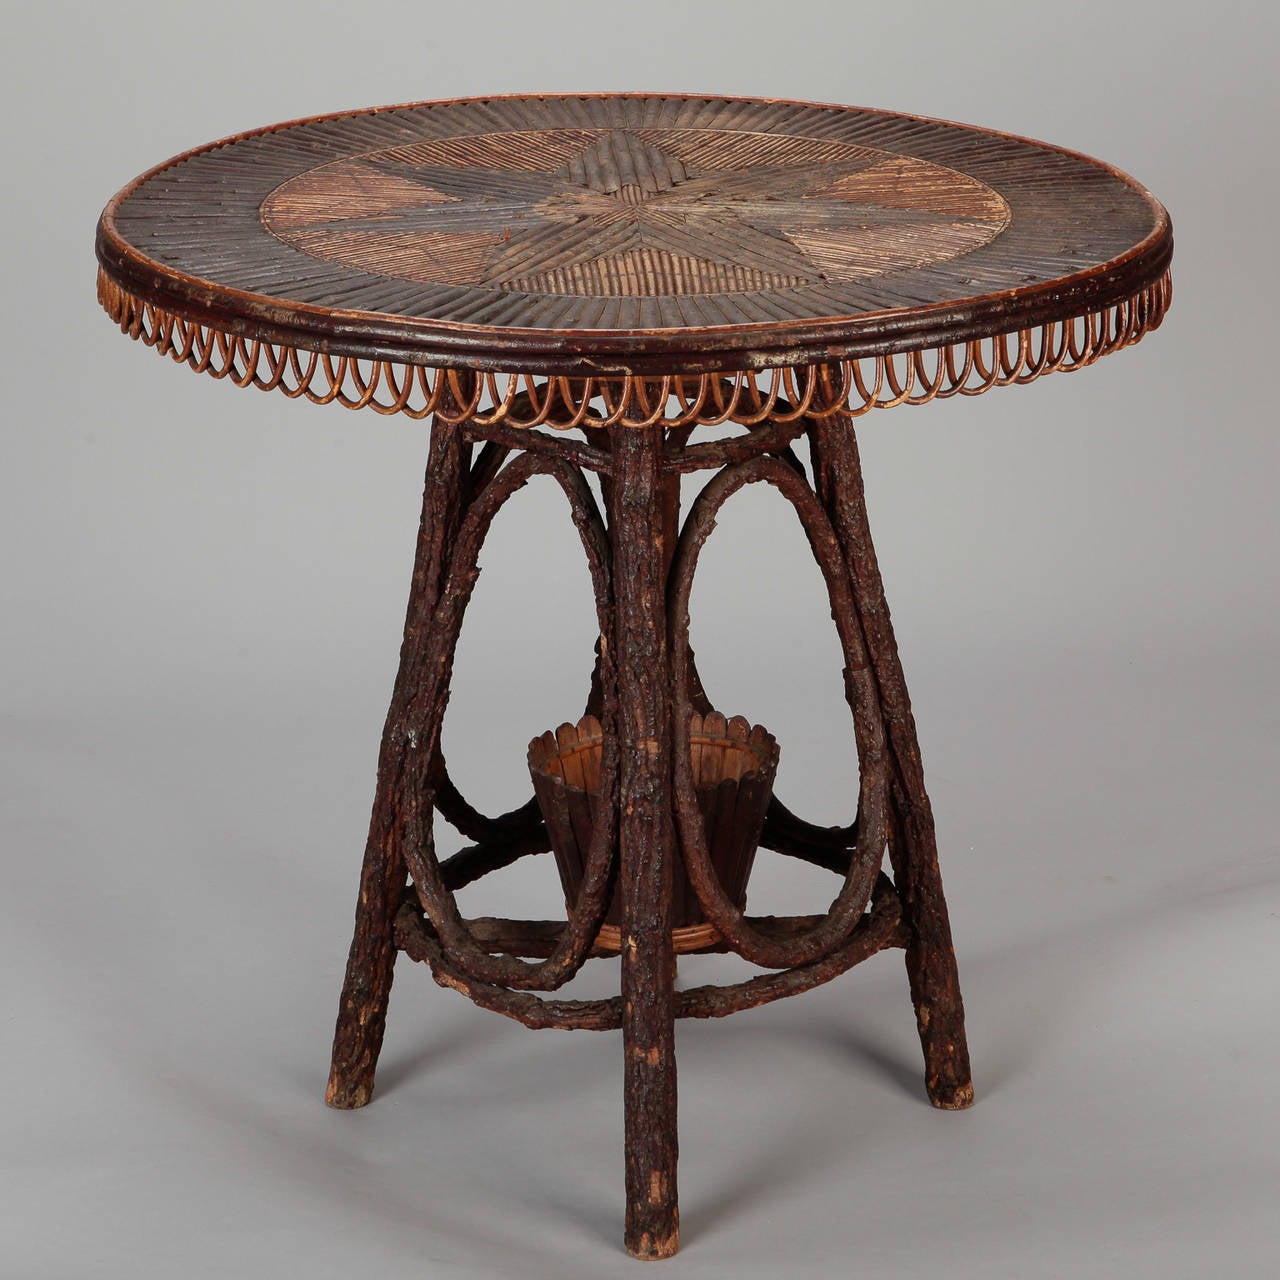 Circa 1920s French round table made with bent willow and twigs featuring a table top star inlay in contrasting light and dark woods.